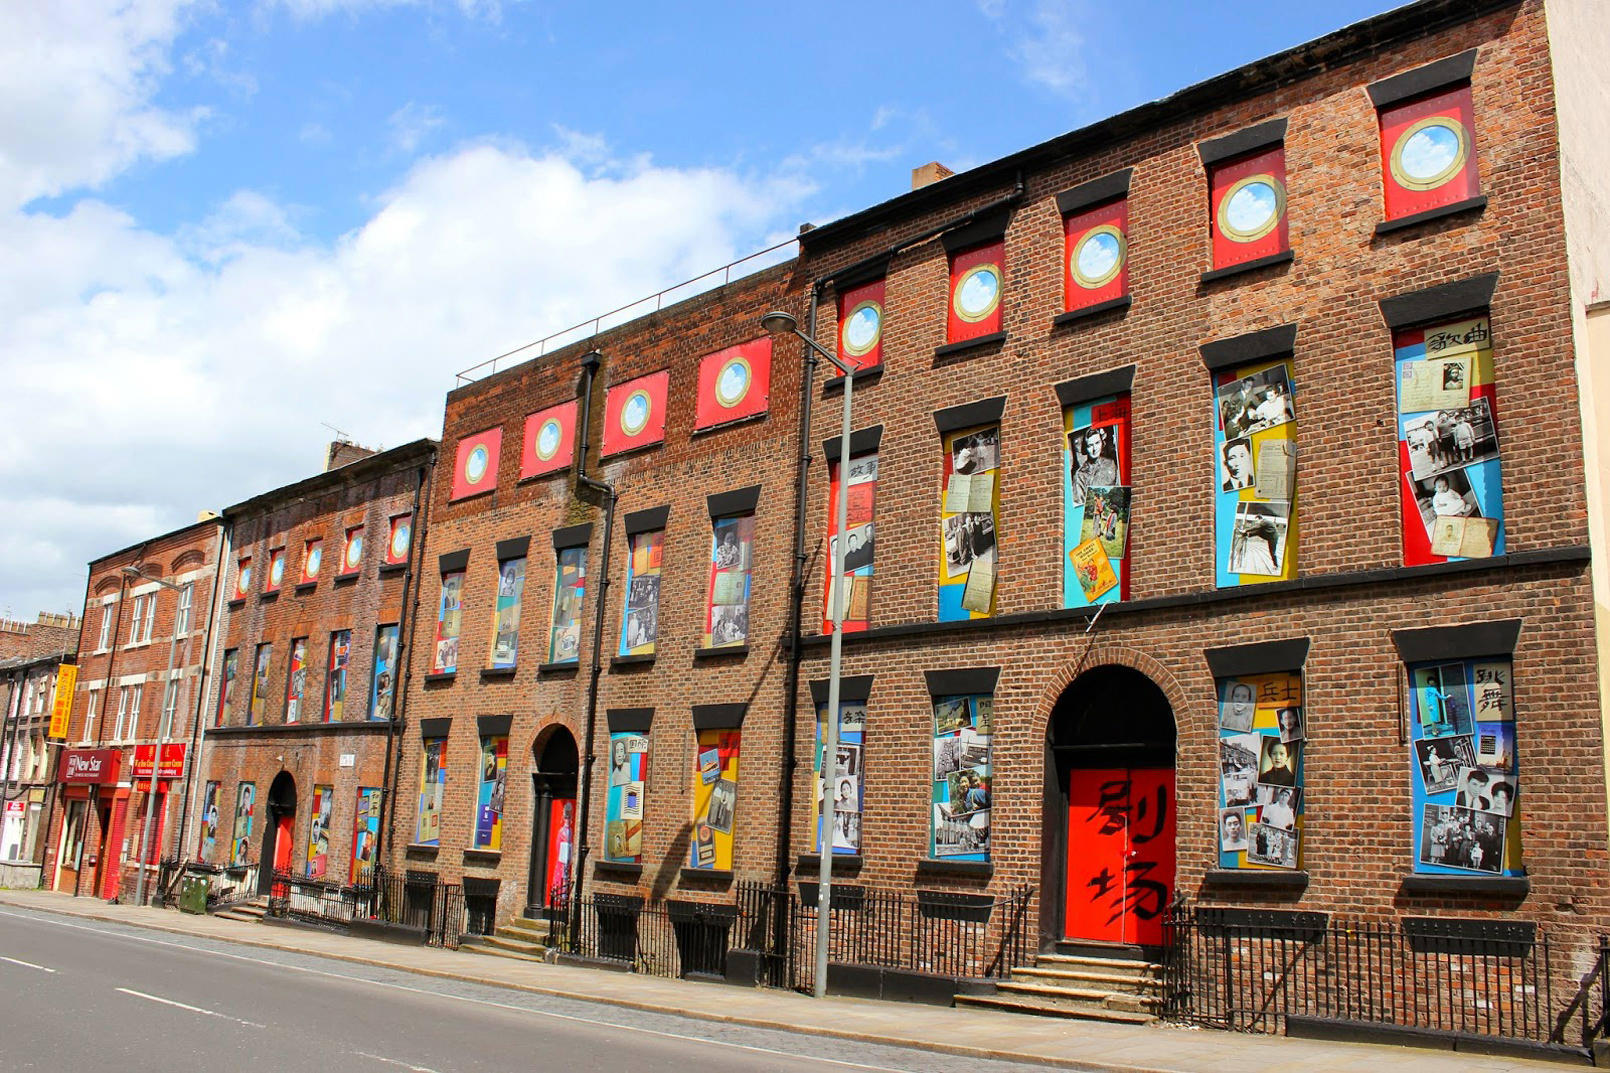 The "Opera for Chinatown" art installation, on Liverpool's Duke Street, features photos of the old boarding house's long forgotten residents .